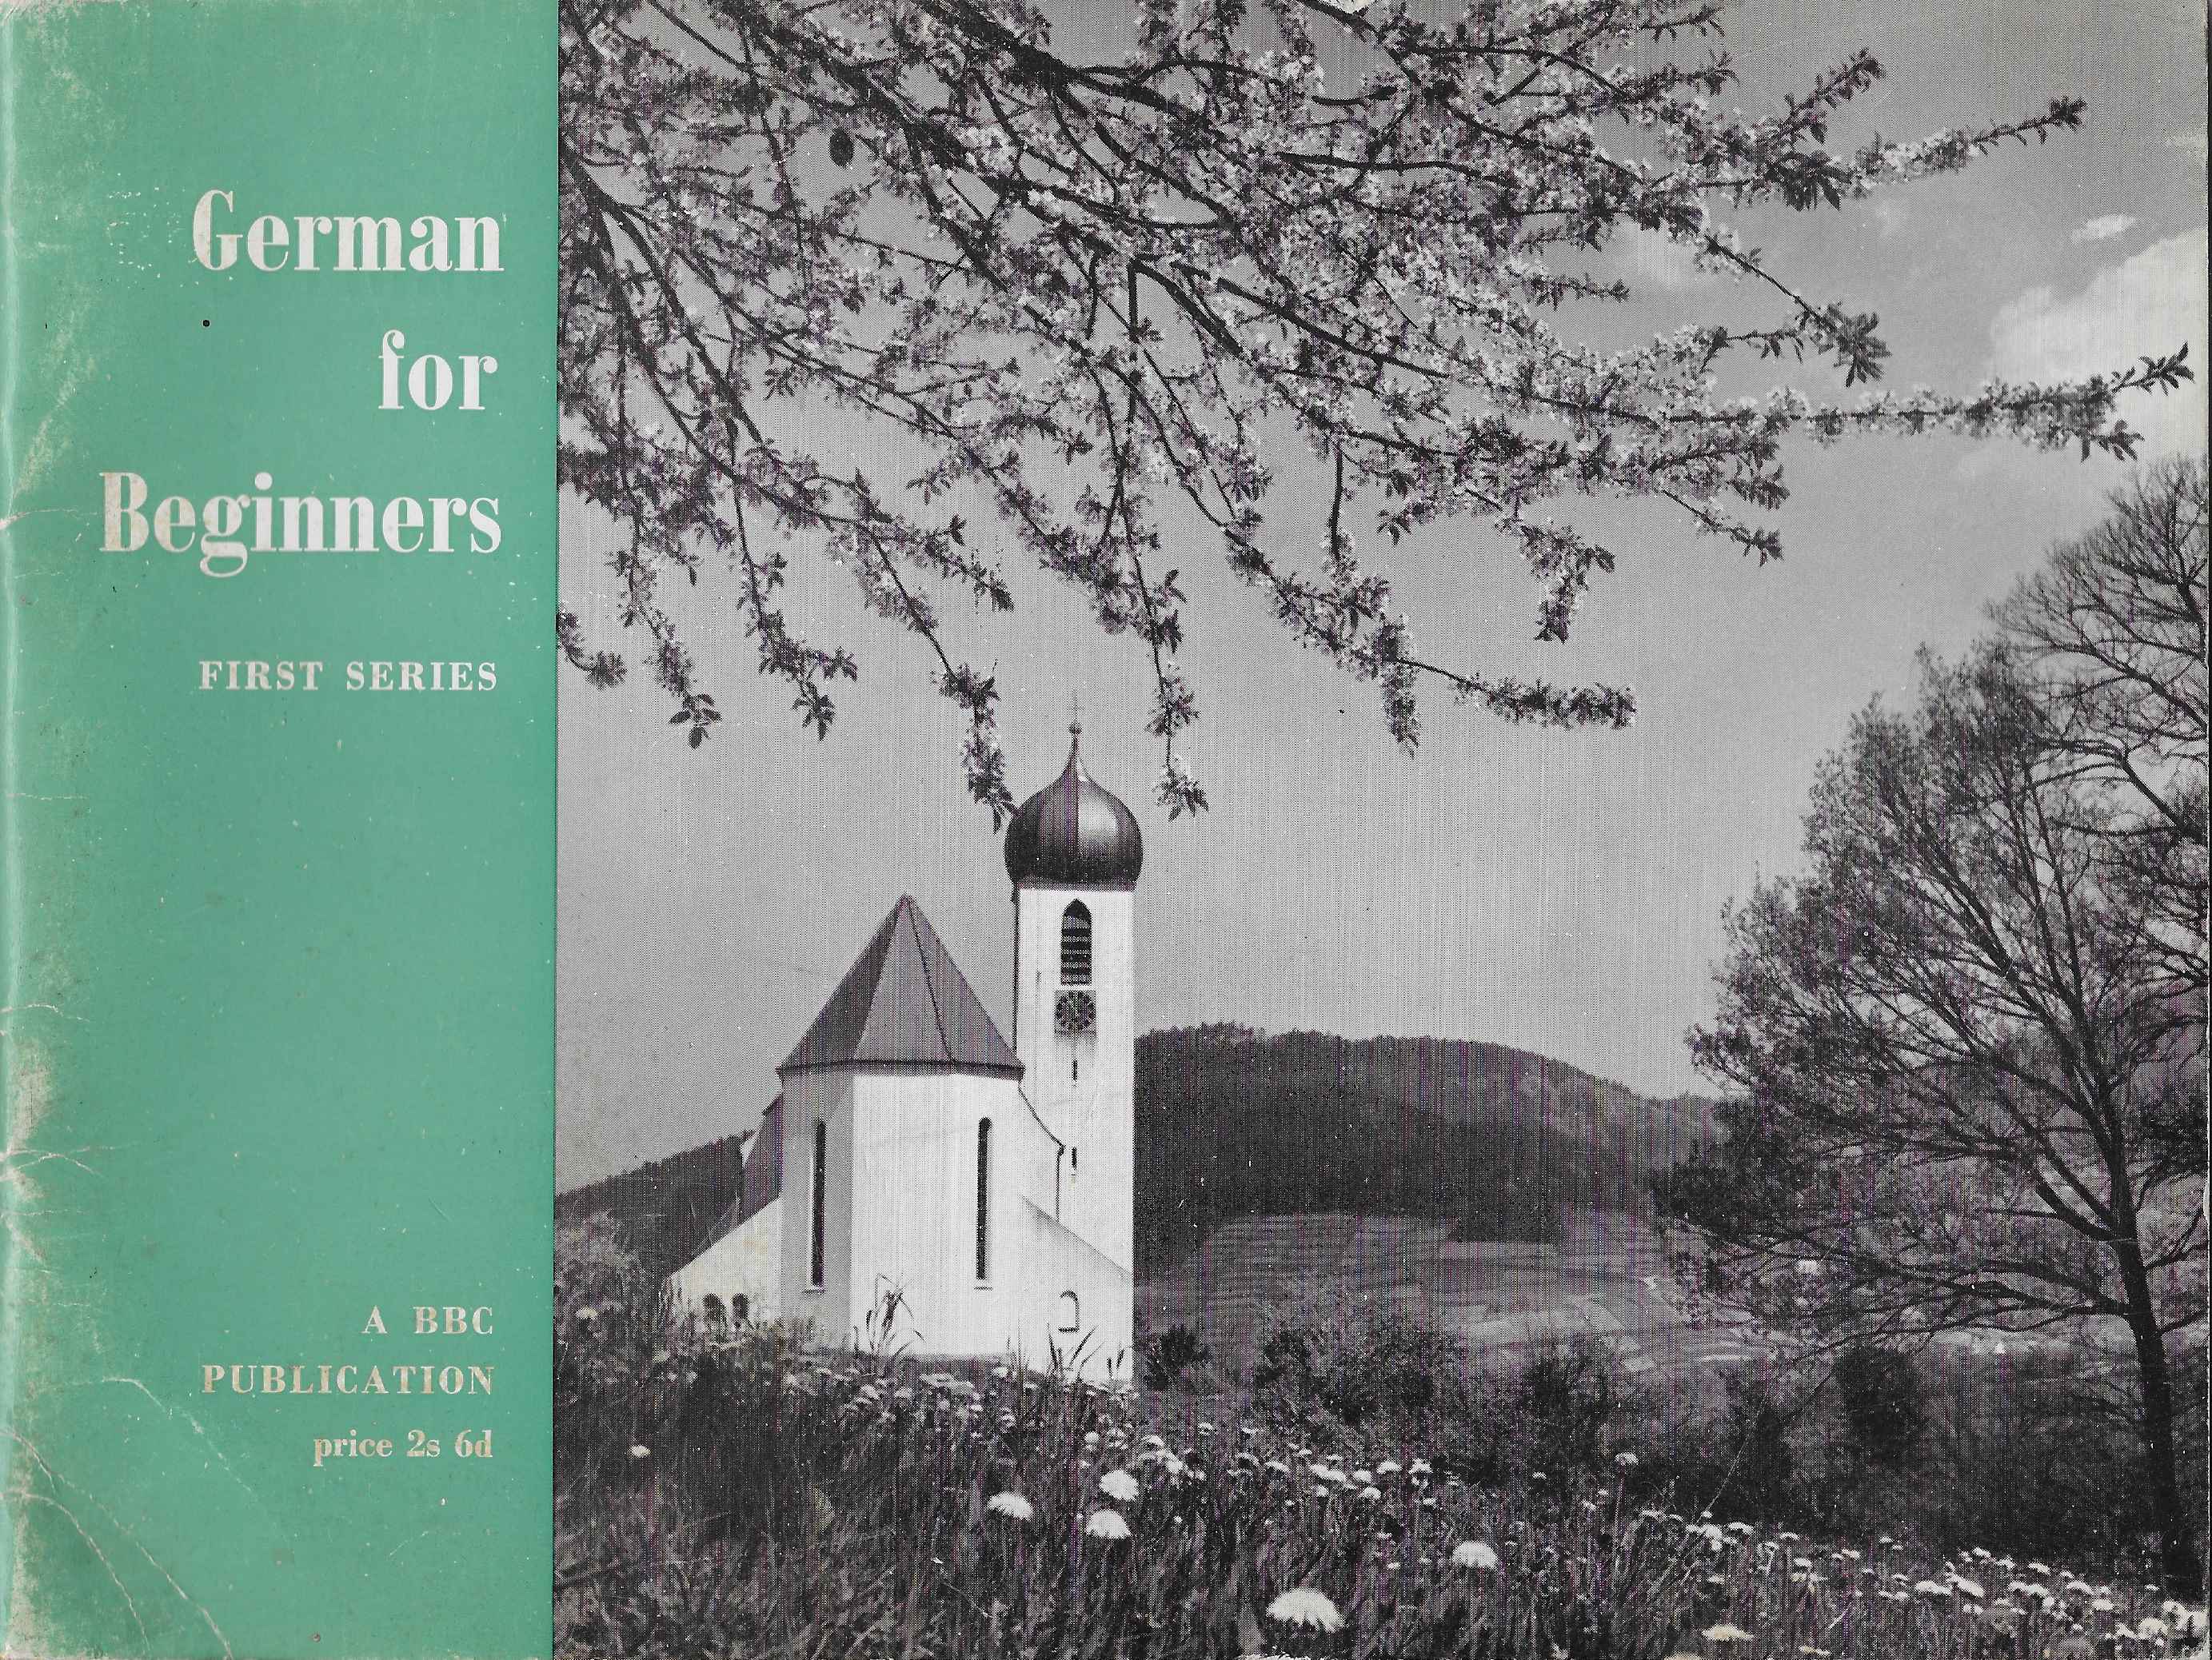 Picture of books-OP 8 German for beginners - First series by artist Sydney Salame from the BBC books - Records and Tapes library